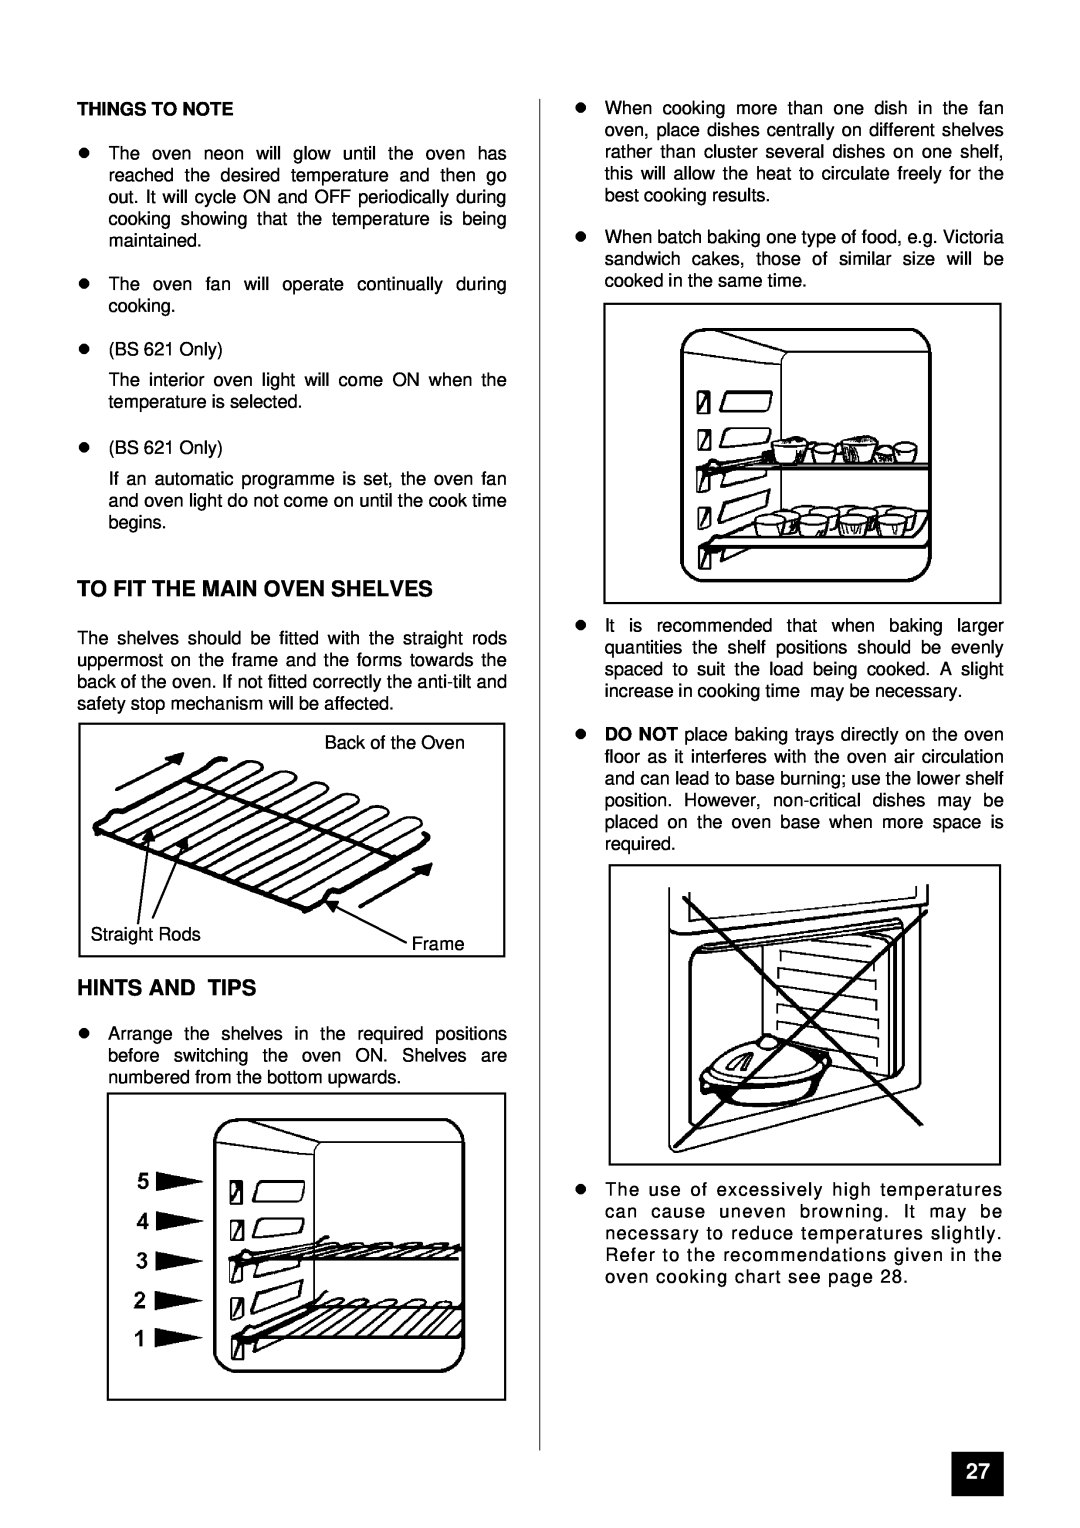 Tricity Bendix BS 611/BS 621 installation instructions To Fit The Main Oven Shelves, lHINTS AND TIPS, Things To Note 